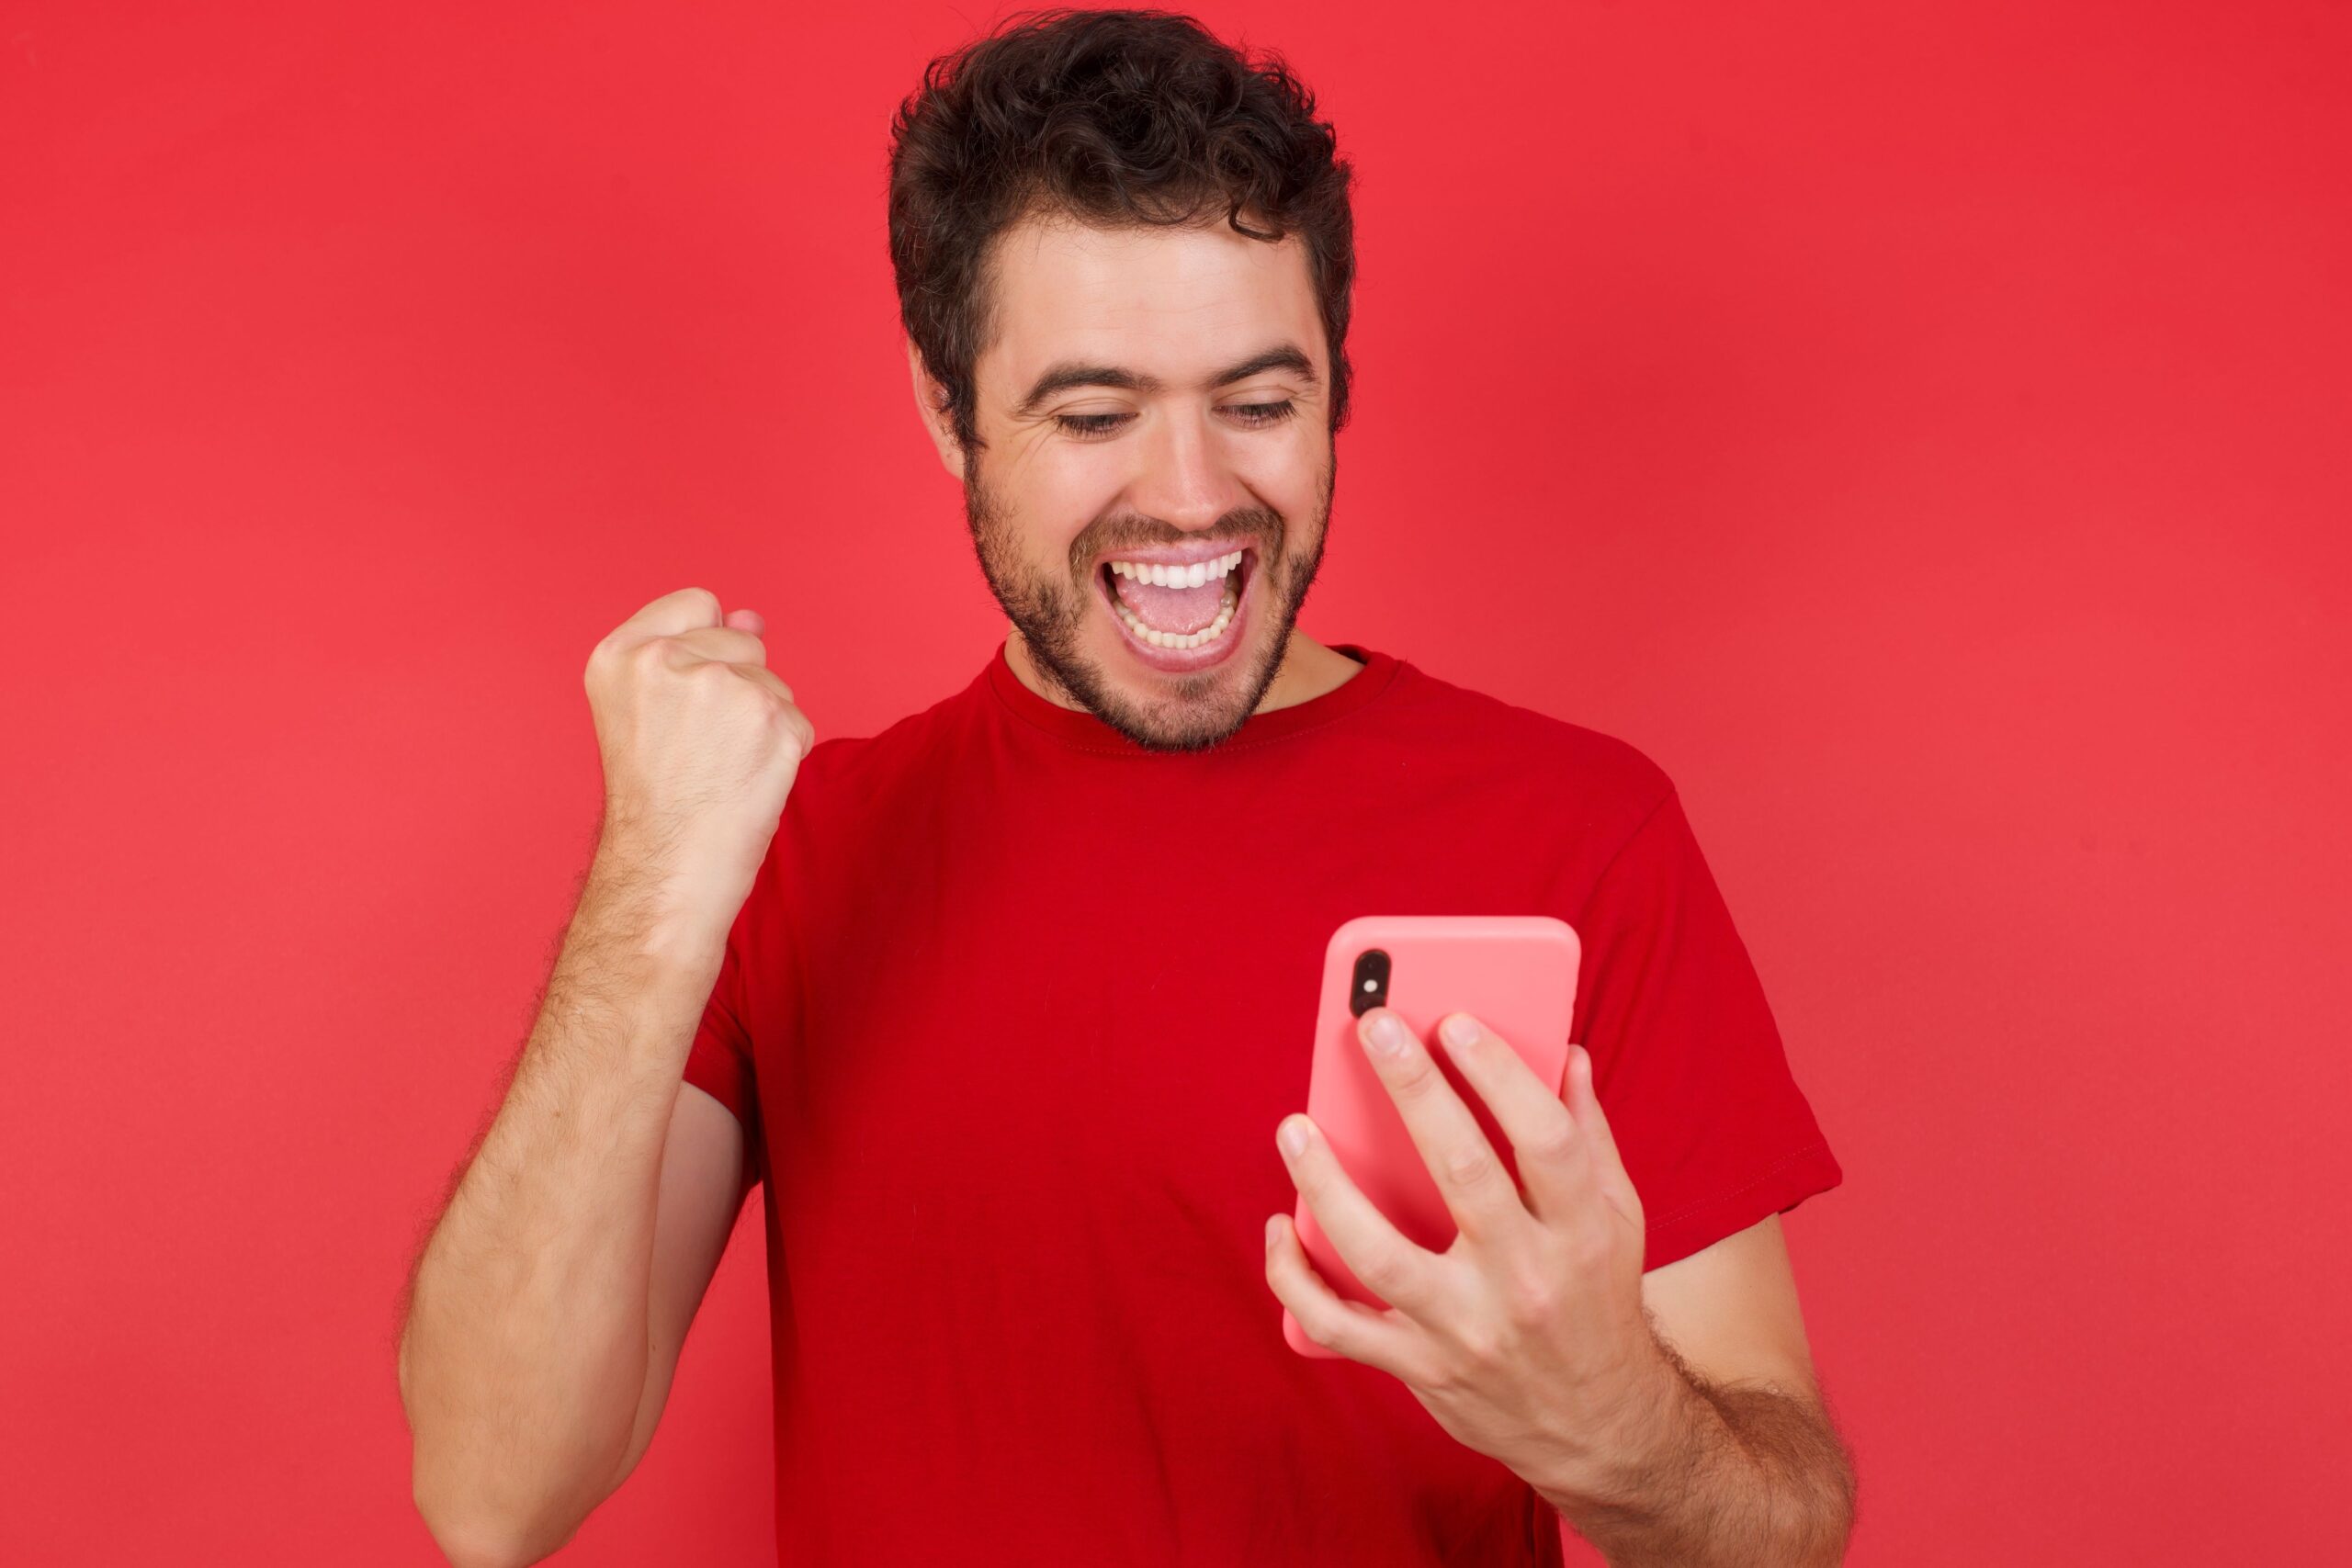 Young Man Celebrating With Phone